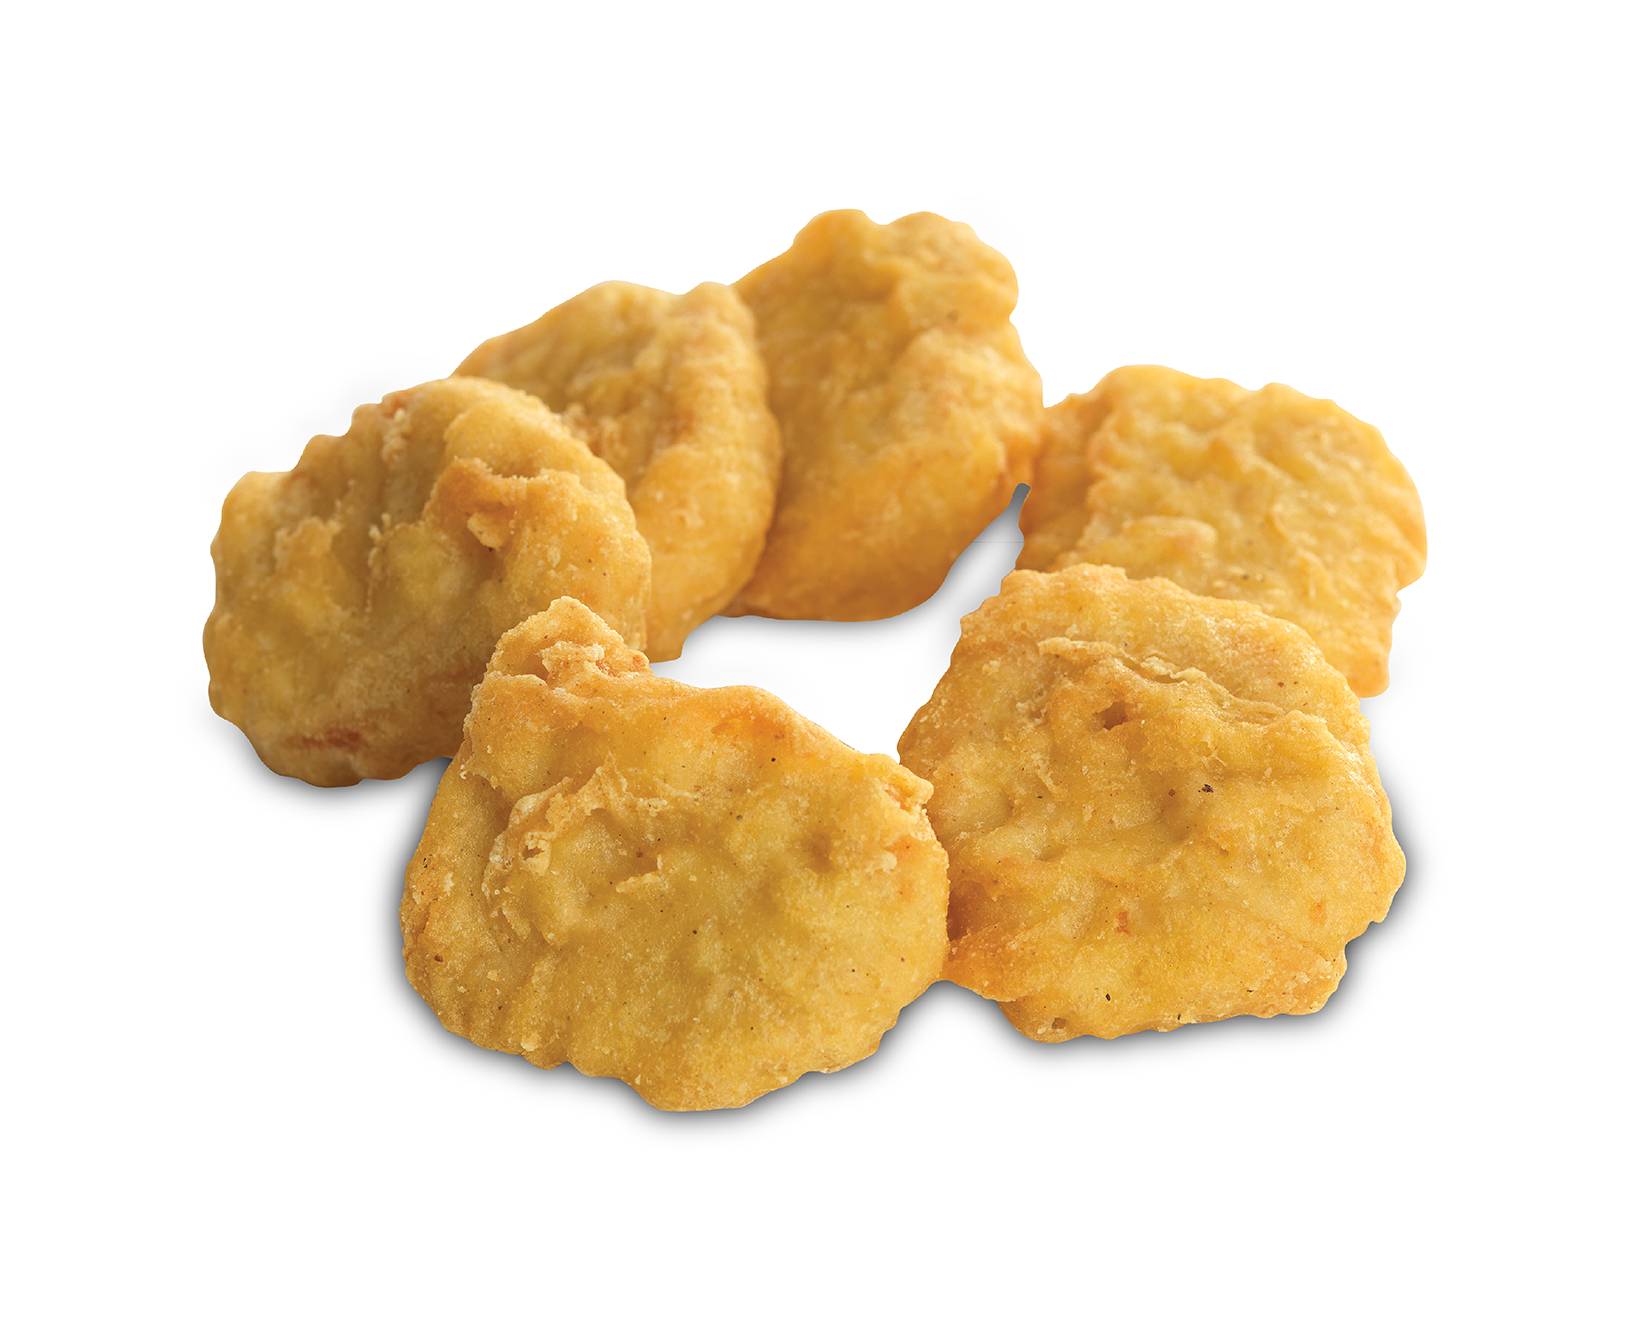 Nuggets x6